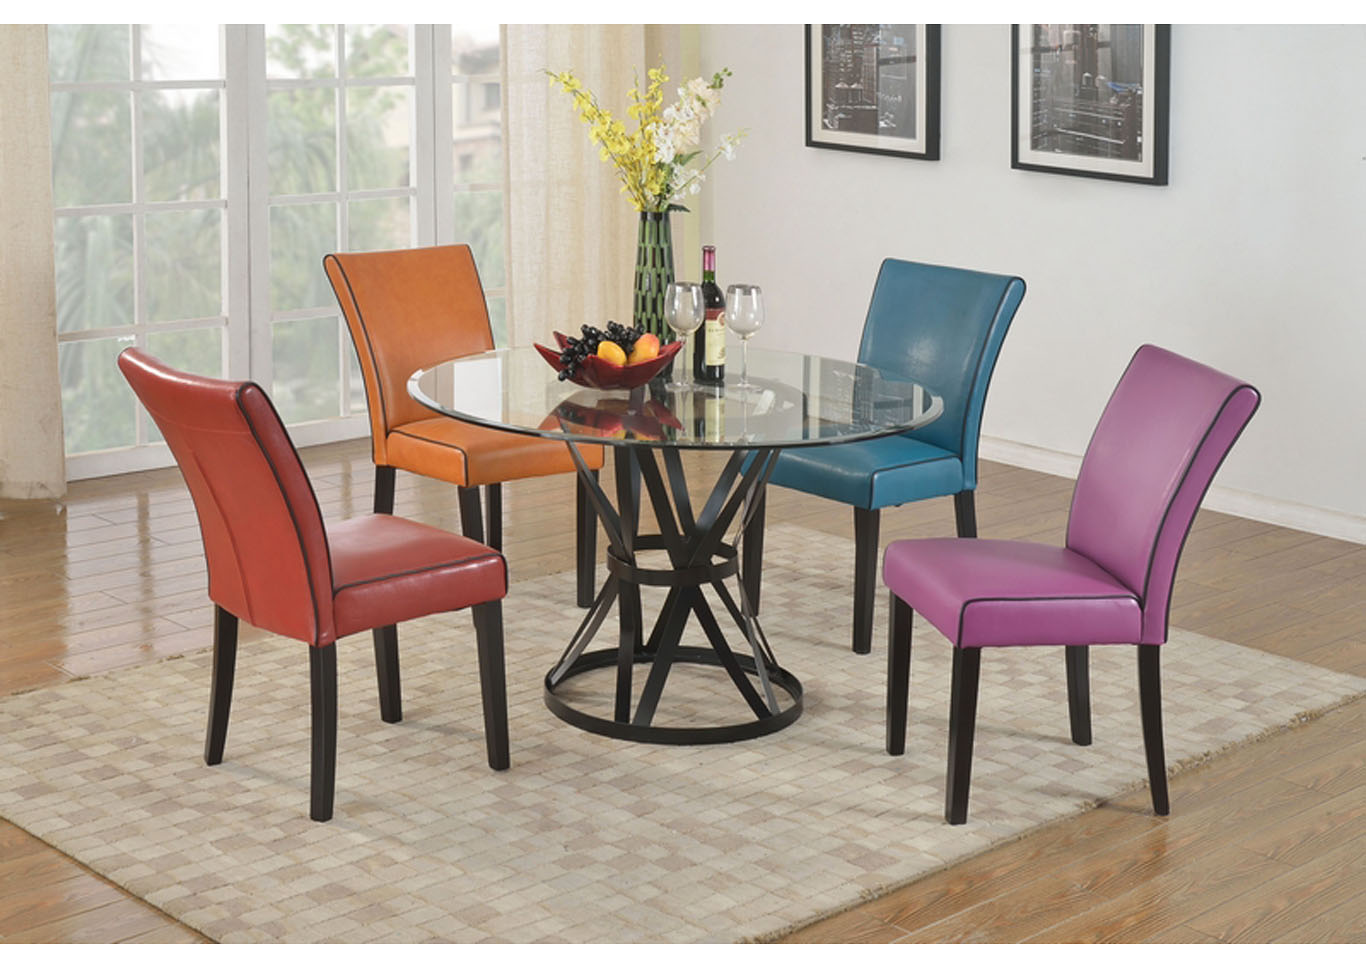 Pandora Multicolor Round Glass Top 5 Piece Dining Set W/ 4 Two-Tone Side Chairs,Chintaly Imports